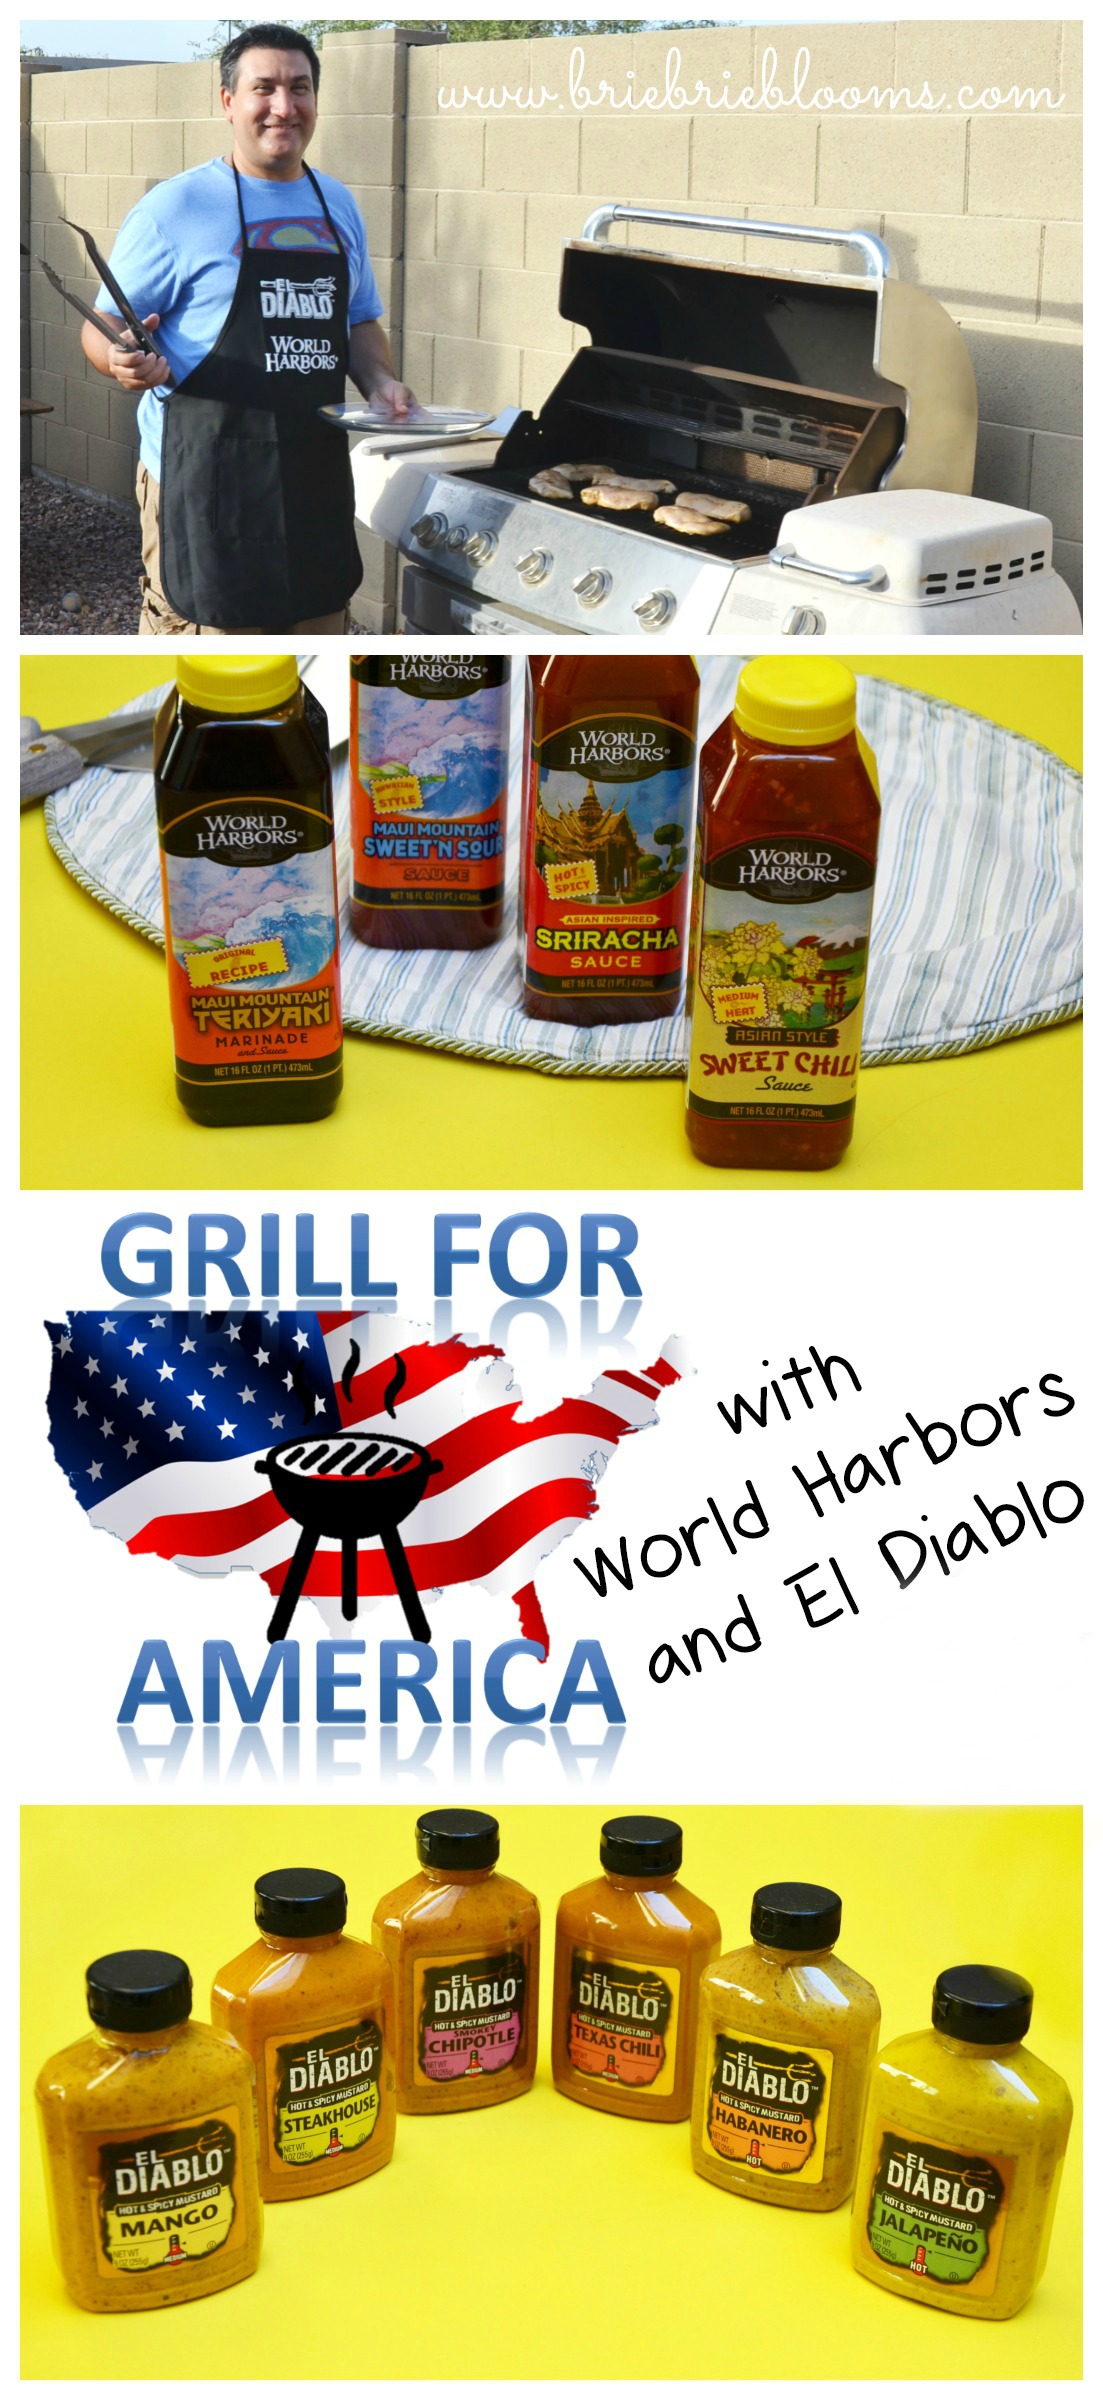 Grill-for-America